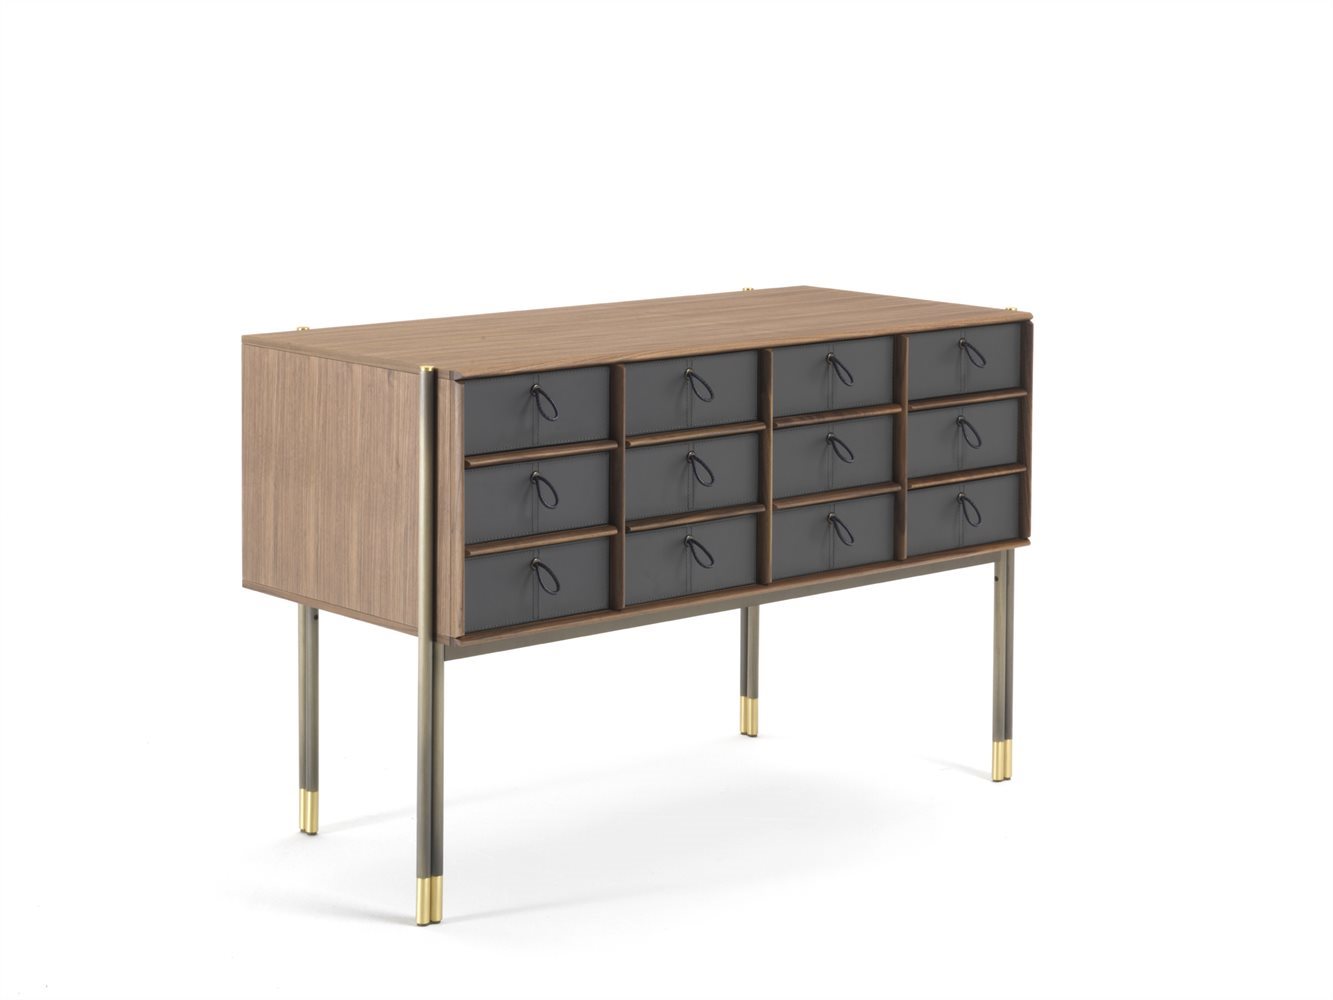 CHEST OF DRAWERS & BEDSIDE TABLES - BAYUS 3 - Cornelio Cappellini